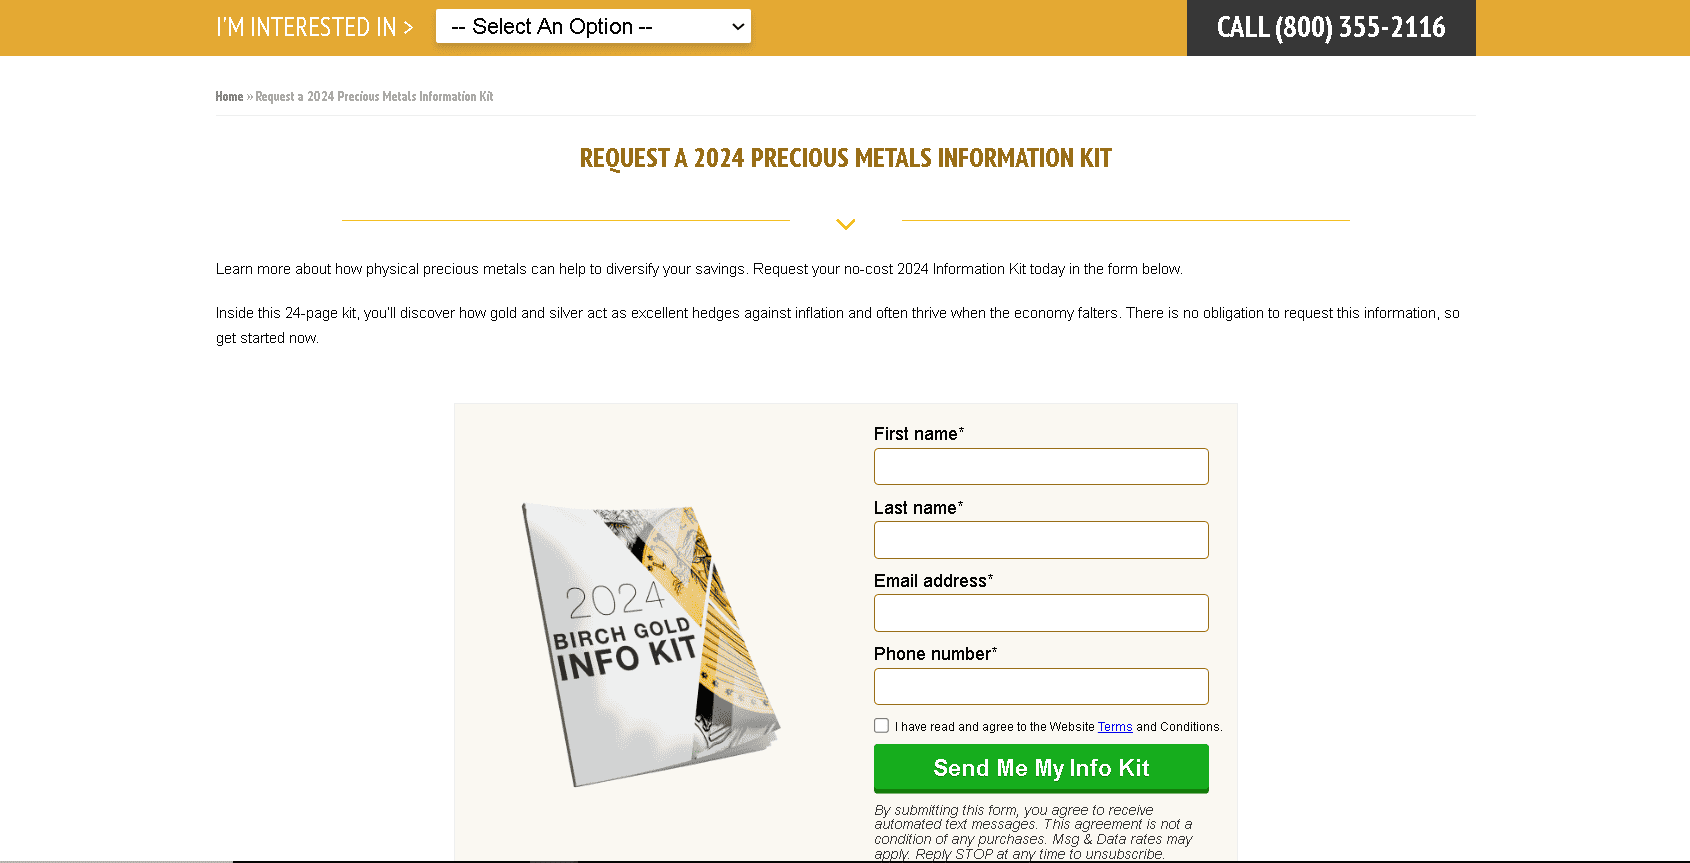 Birch Gold Group free gold investment kit